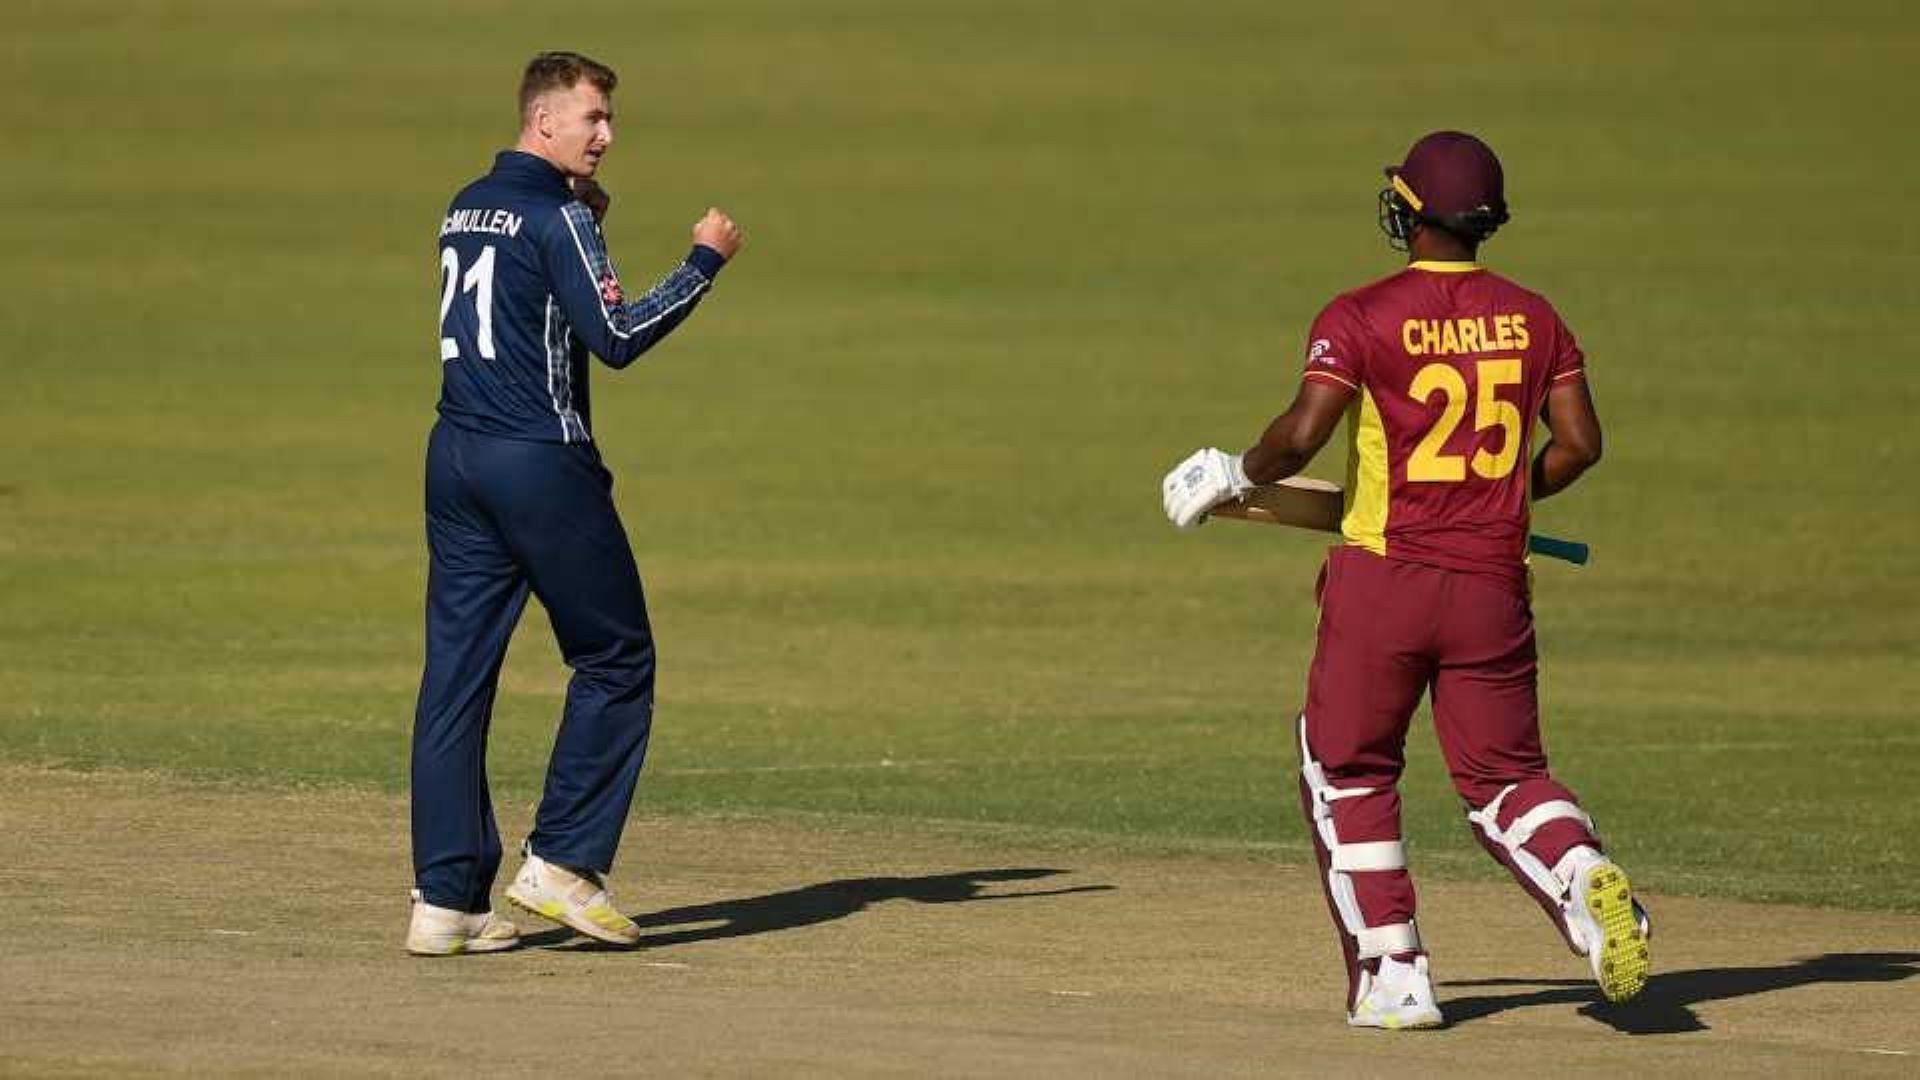 McMullen&#039;s opening burst dismantled the West Indian top-order